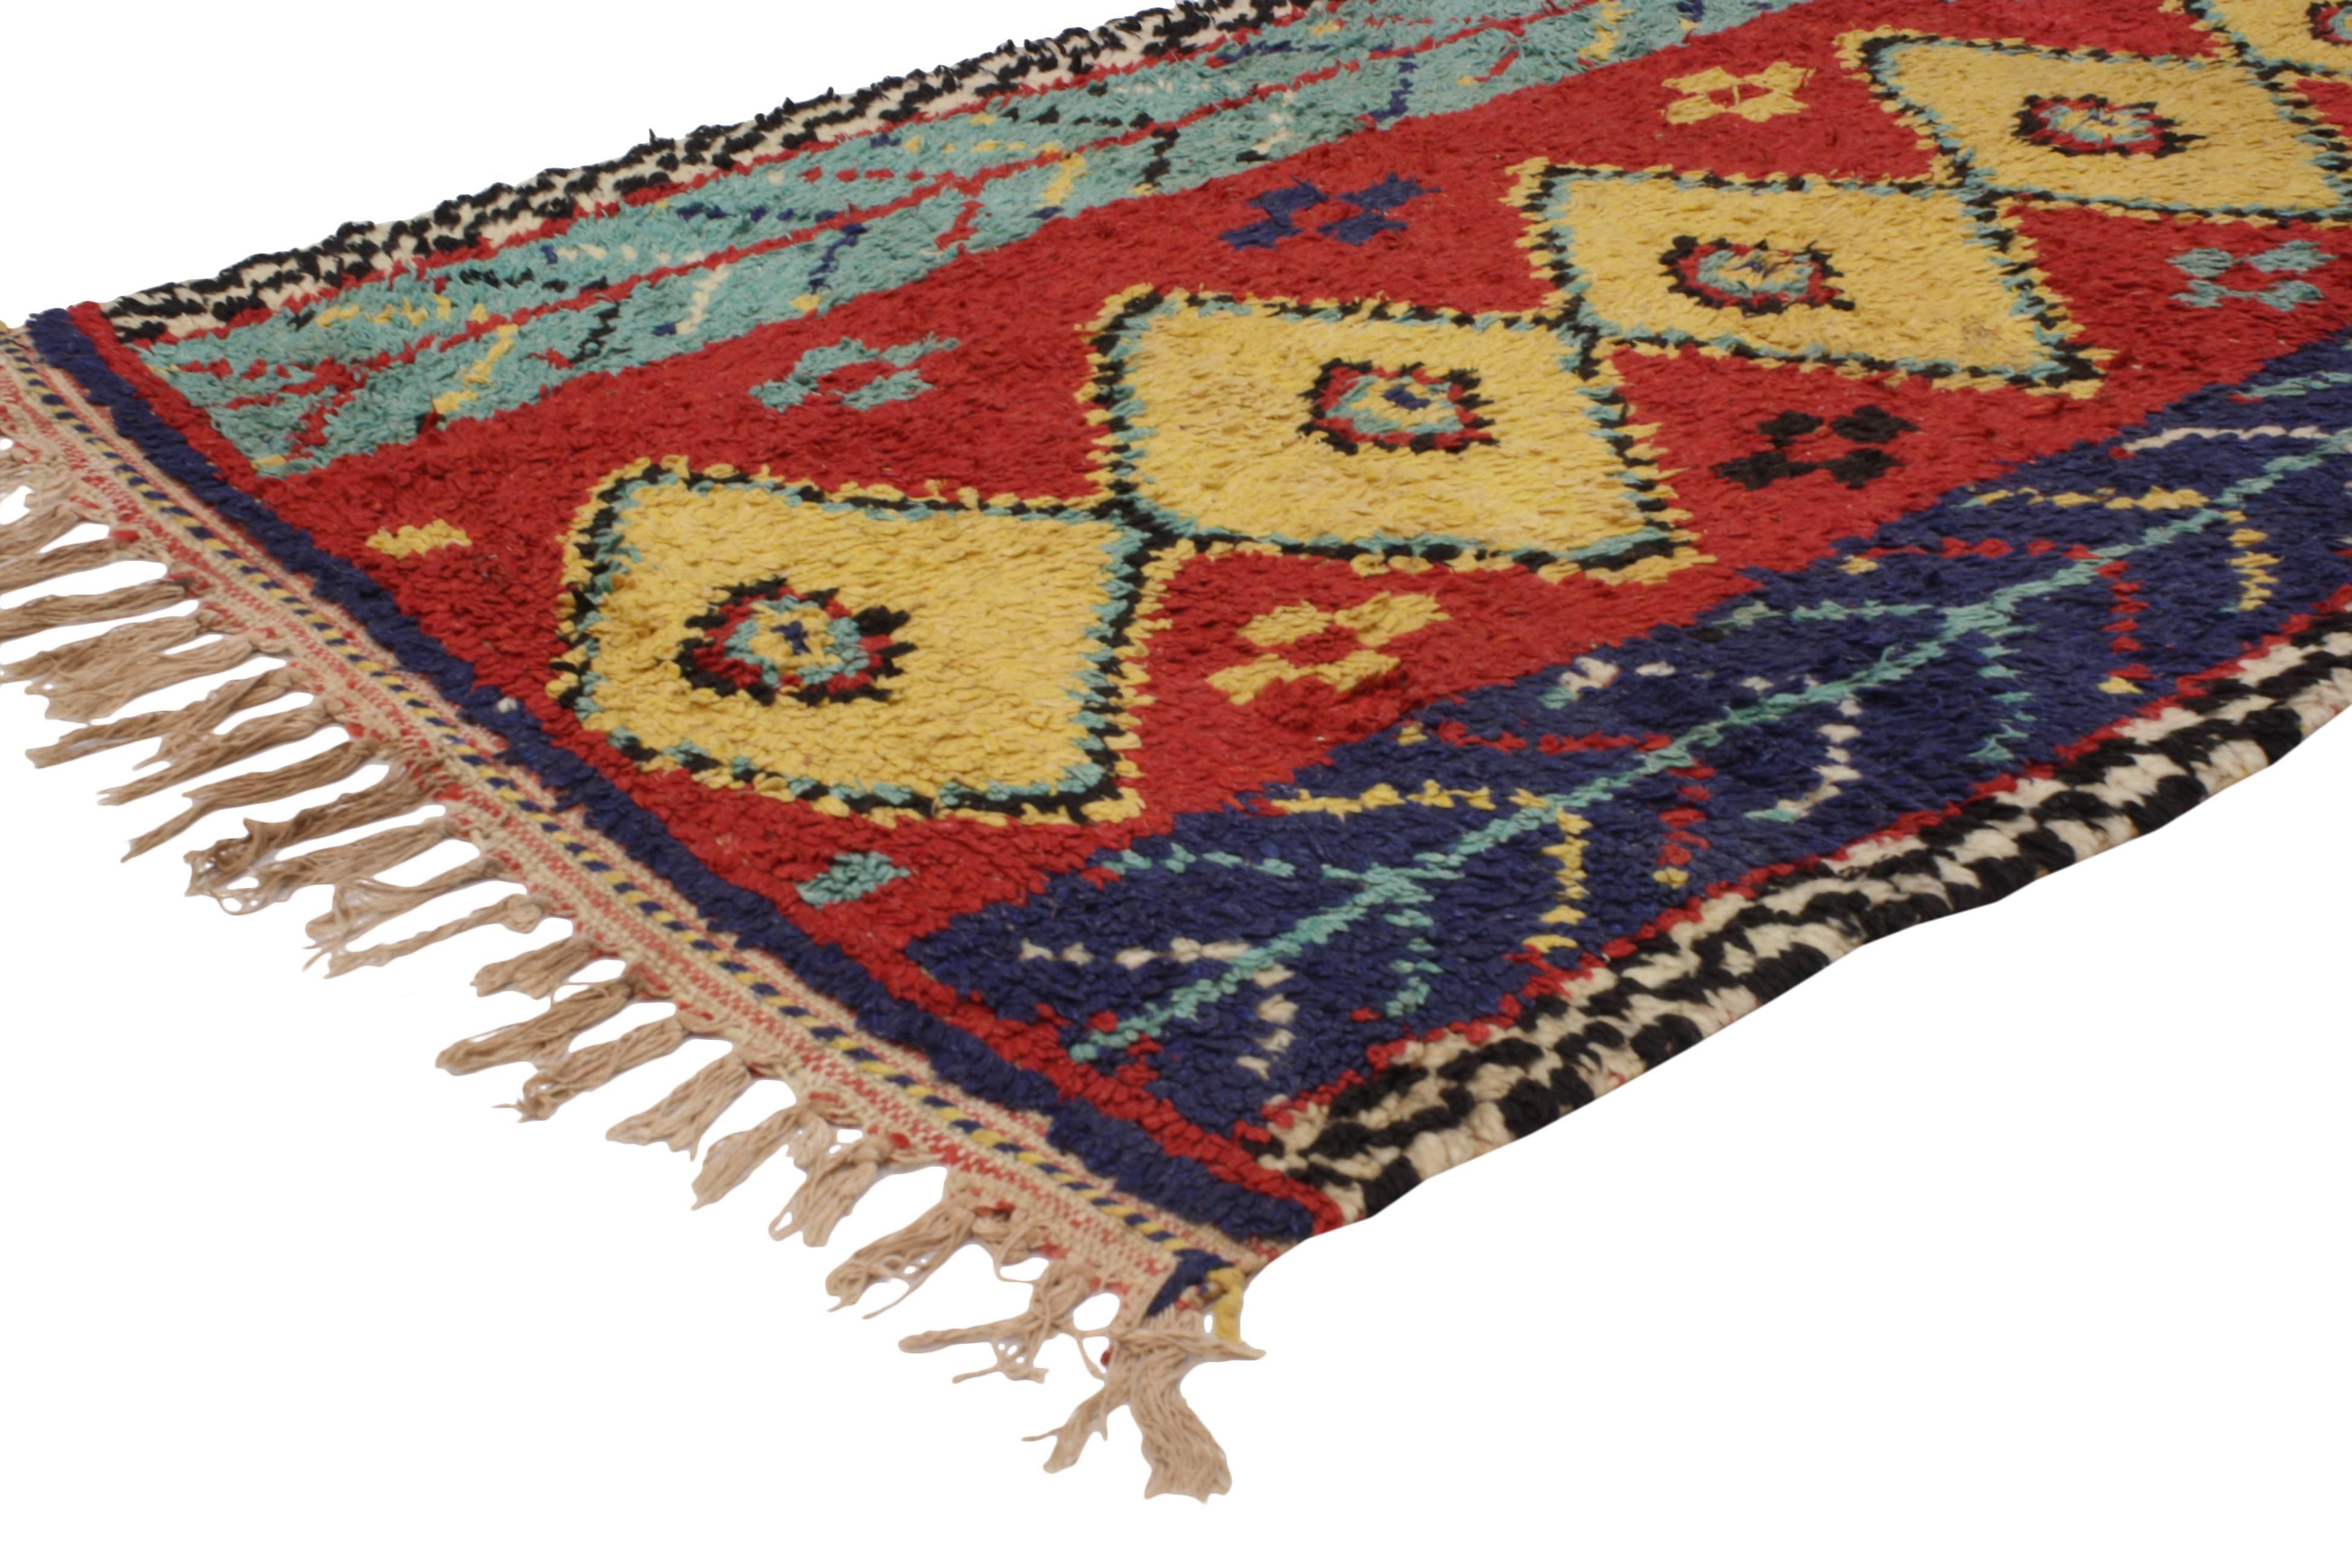 20445 Vintage Berber Moroccan Rug with Tribal Style. With its bold colors and geometric tribal design aesthetic, this hand-knotted wool vintage Berber Moroccan rug gives a youthful and whimsical feel. It features a stacked column of saffron colored